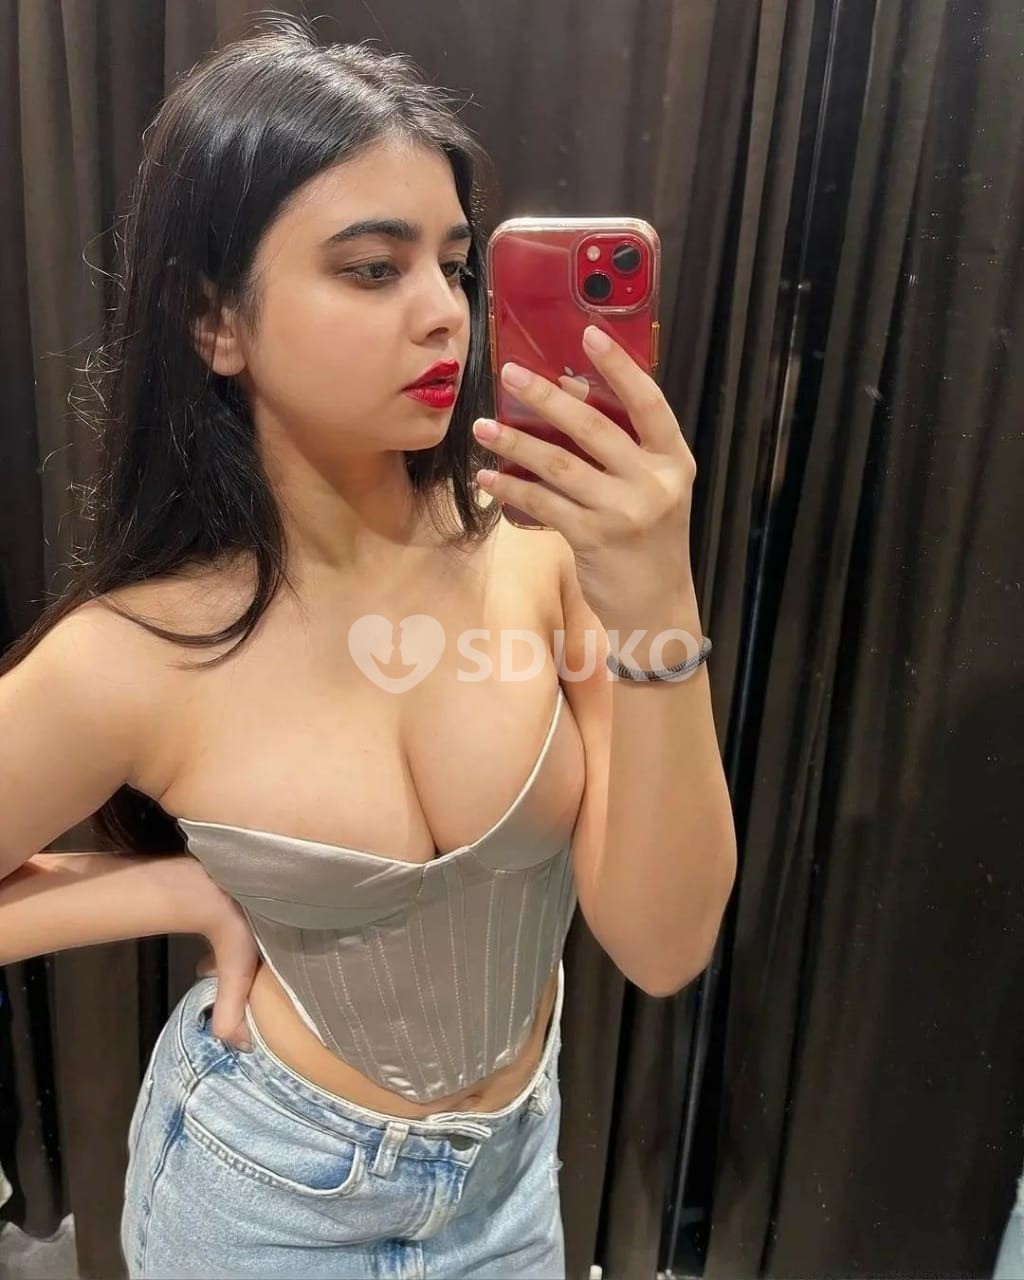 HYDERABAD CALL ME PAYAL LOW PRICE UNLIMITED SHOOT 100% GENUINE SEXY VIP CALL GIRLS ARE PROVIDED SECURE SERVICES CALL 24 